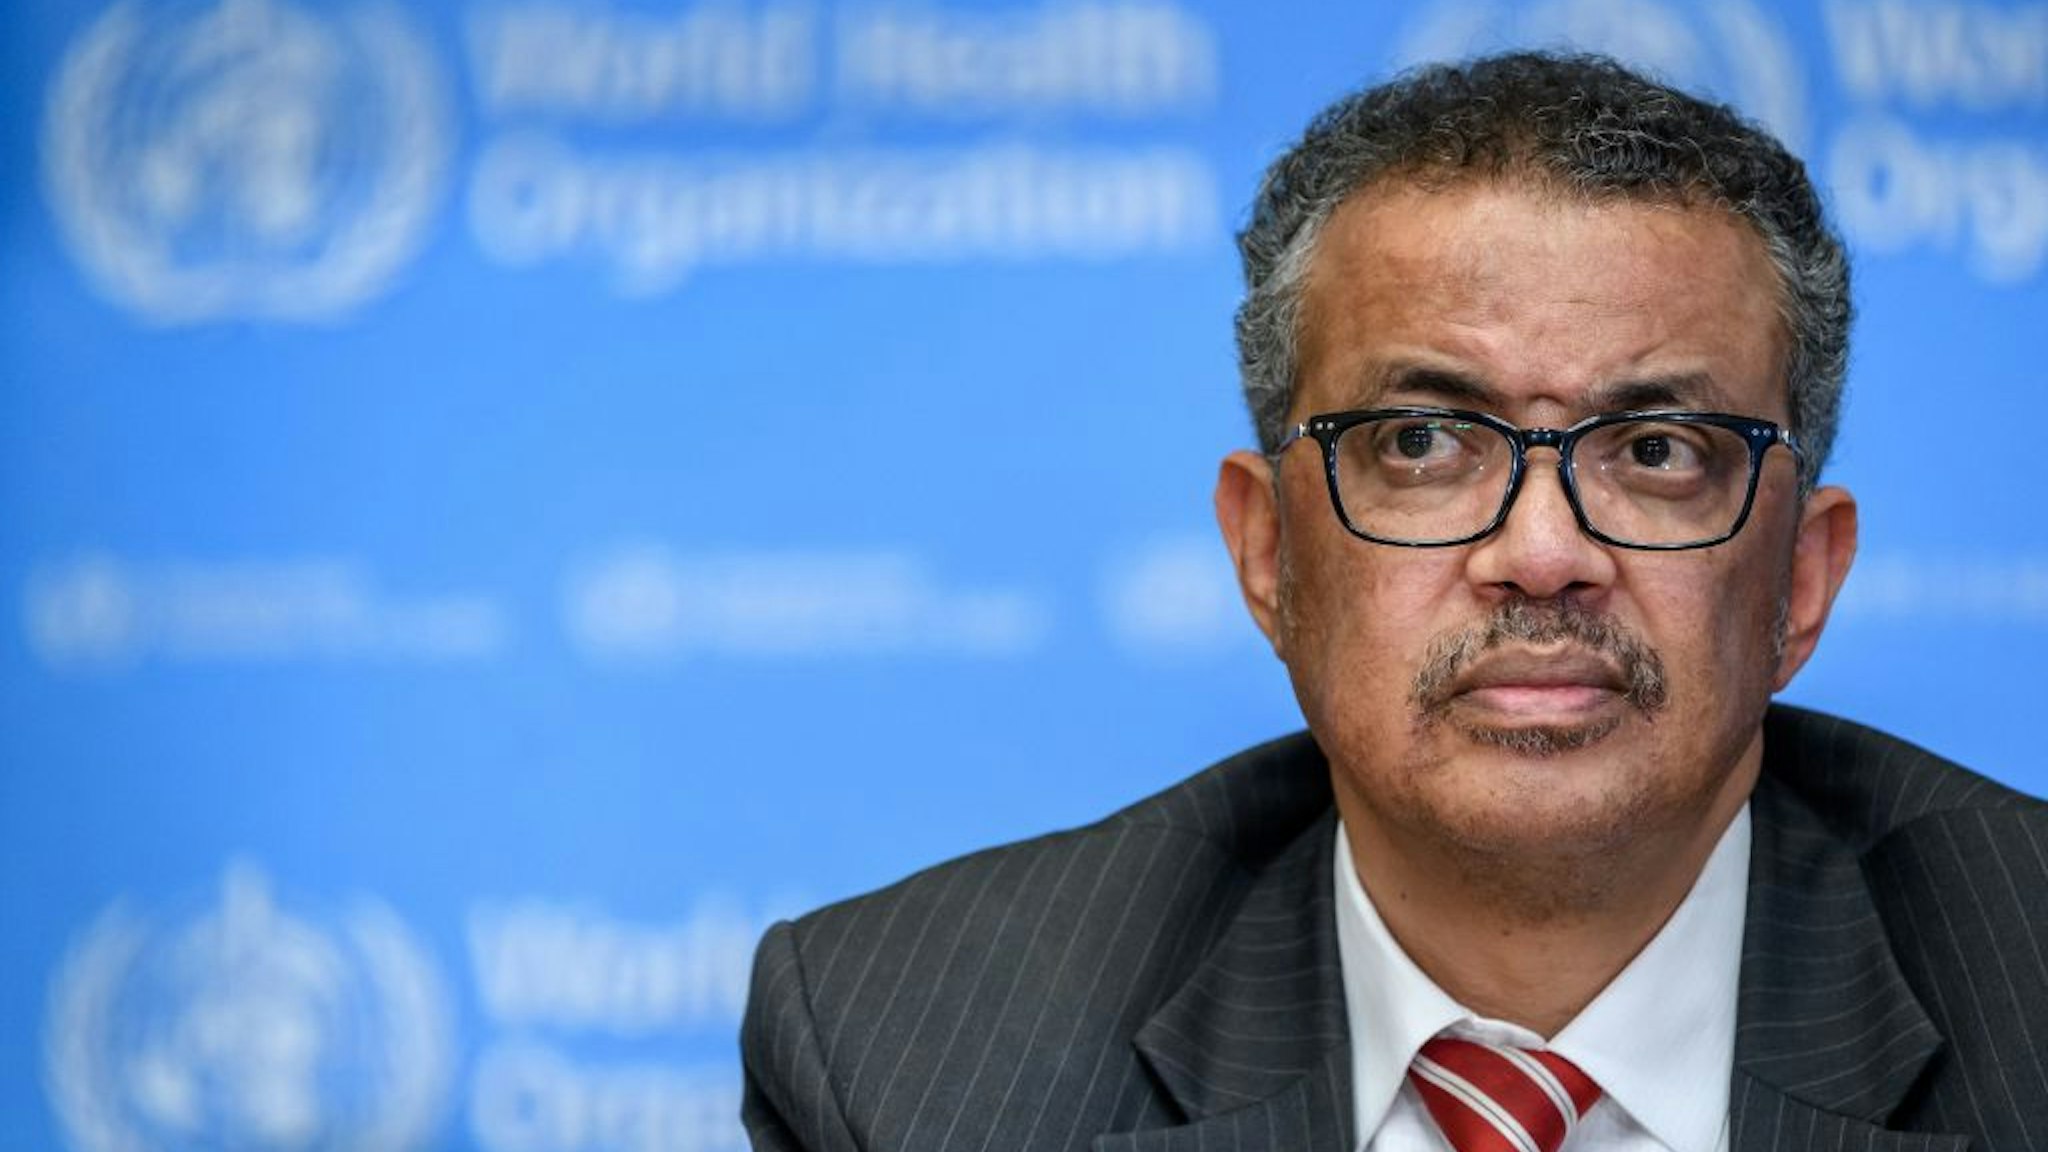 TOPSHOT - EDITORS NOTE: Graphic content / World Health Organization (WHO) Director-General Tedros Adhanom Ghebreyesus attends a daily press briefing on COVID-19 virus at the WHO headquarters in Geneva on March 11, 2020. - WHO Director-General Tedros Adhanom Ghebreyesus announced on March 11, 2020 that the new coronavirus outbreak can now be characterised as a pandemic. (Photo by Fabrice COFFRINI / AFP)